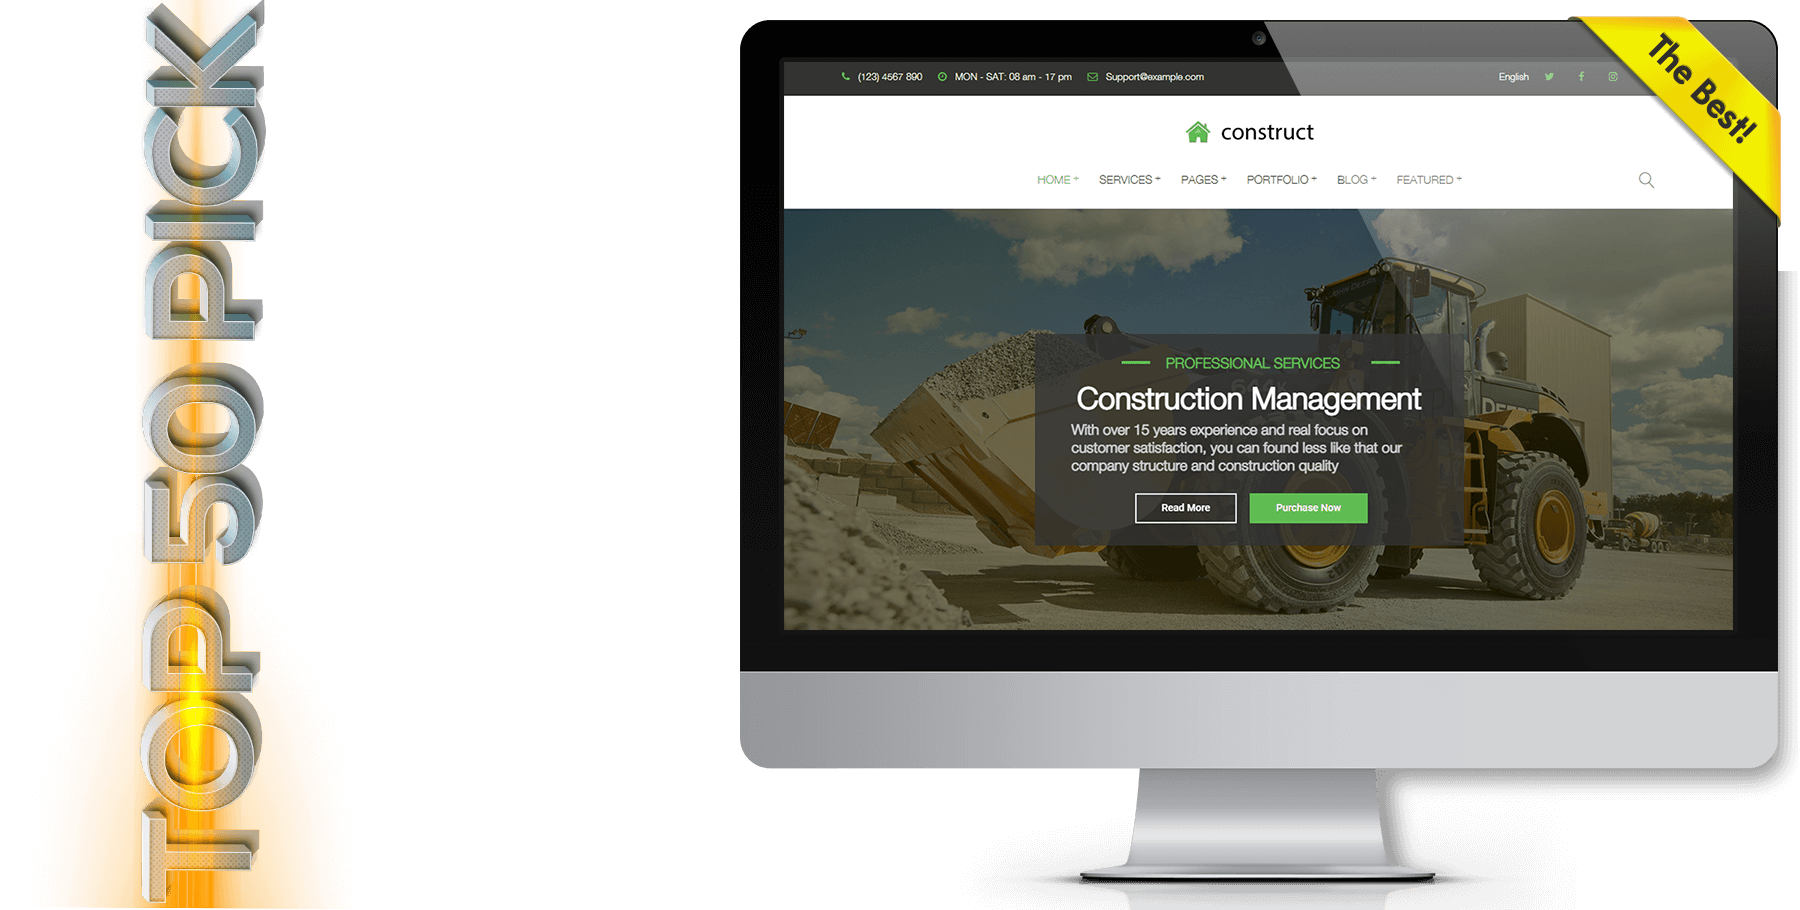 A website design in construction named Construct